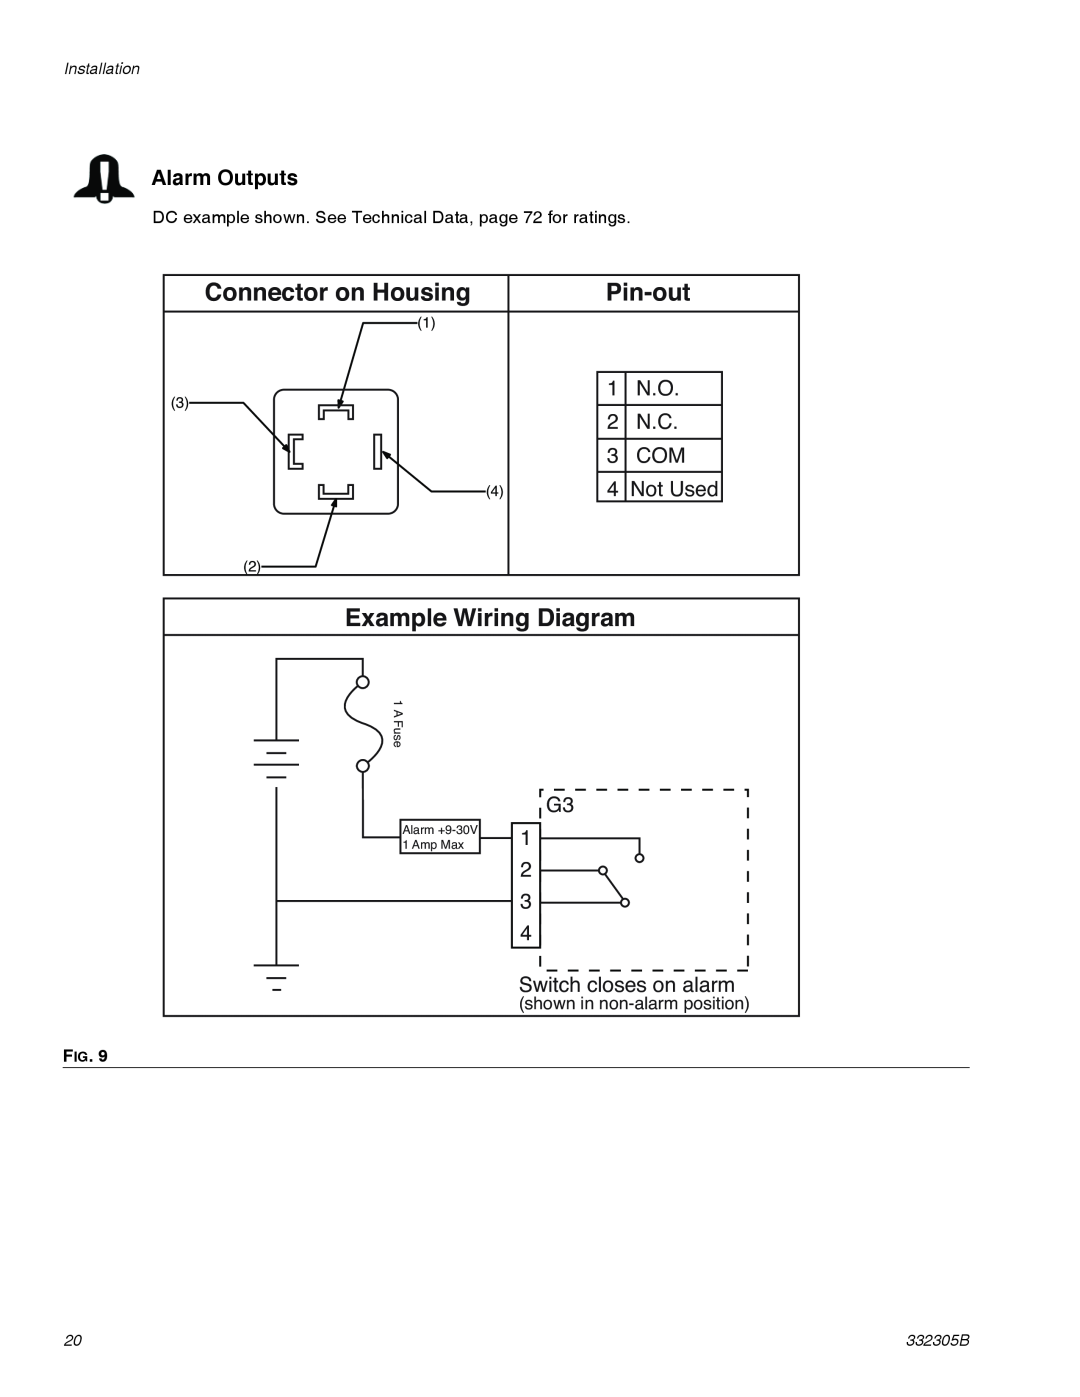 Graco 332305B important safety instructions Alarm Outputs, Connector on Housing, Pin-out, Example Wiring Diagram 